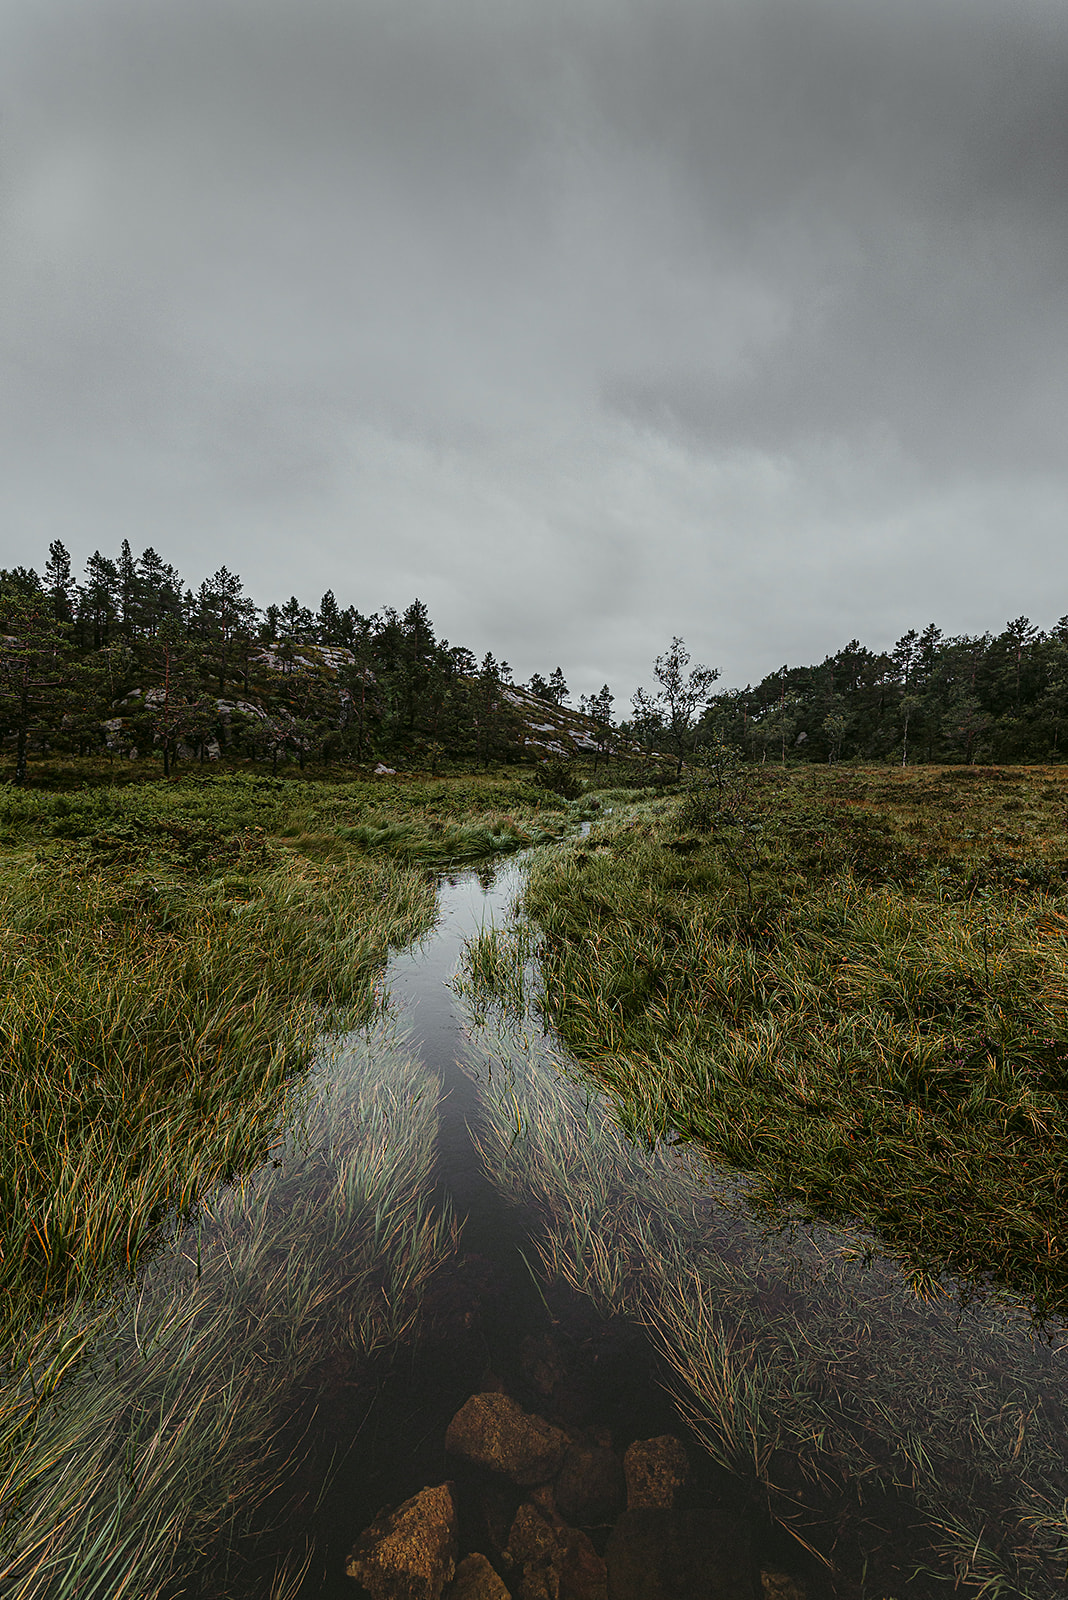 Creek running through swamp on cloudy day